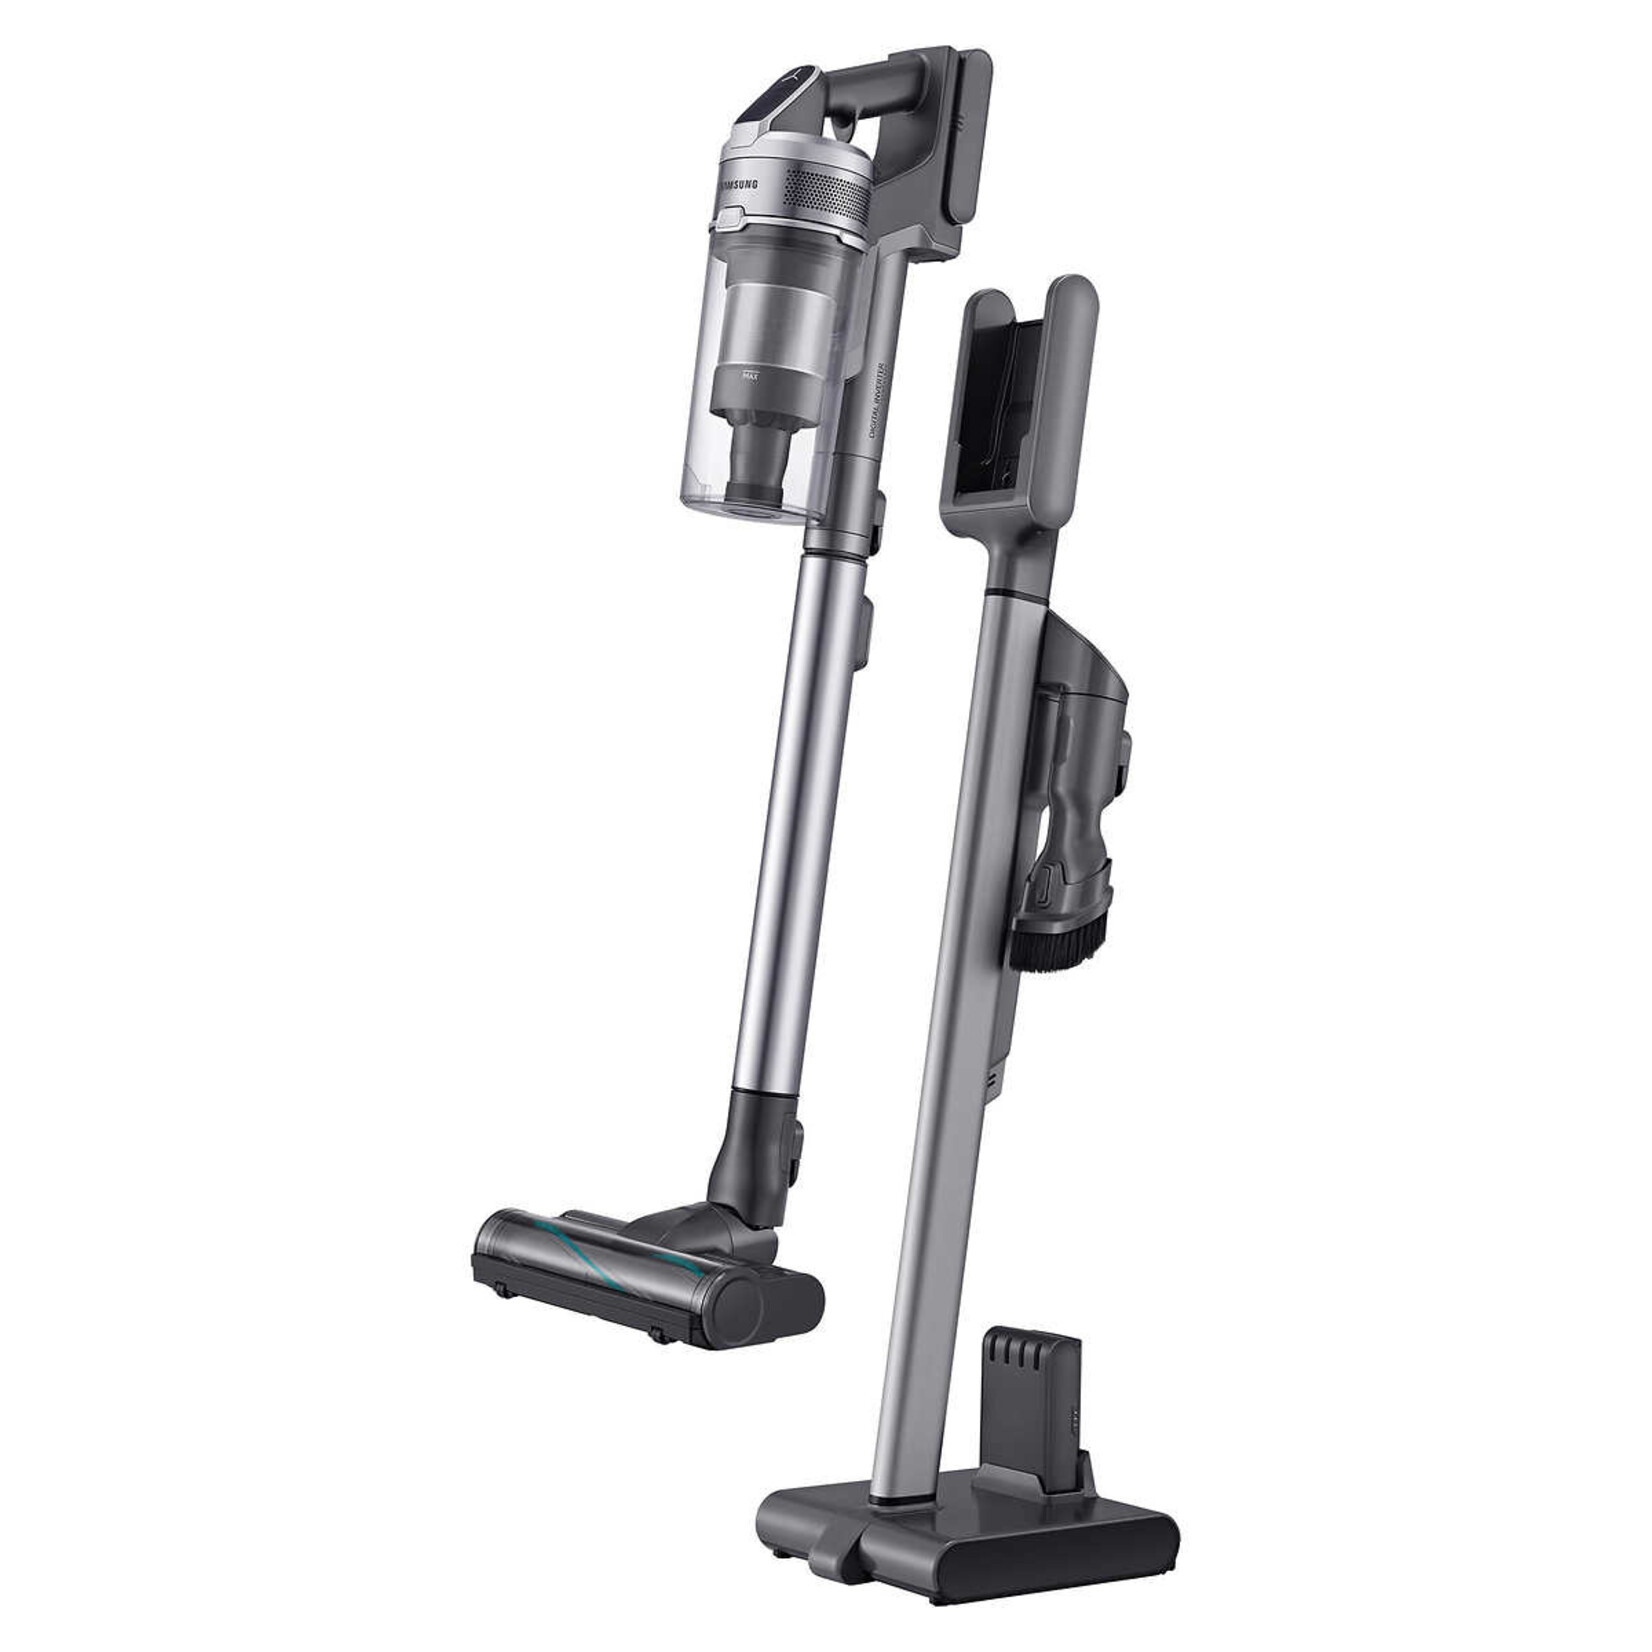 Samsung Jet90 Ultimate Stick Vacuum with Extra Battery